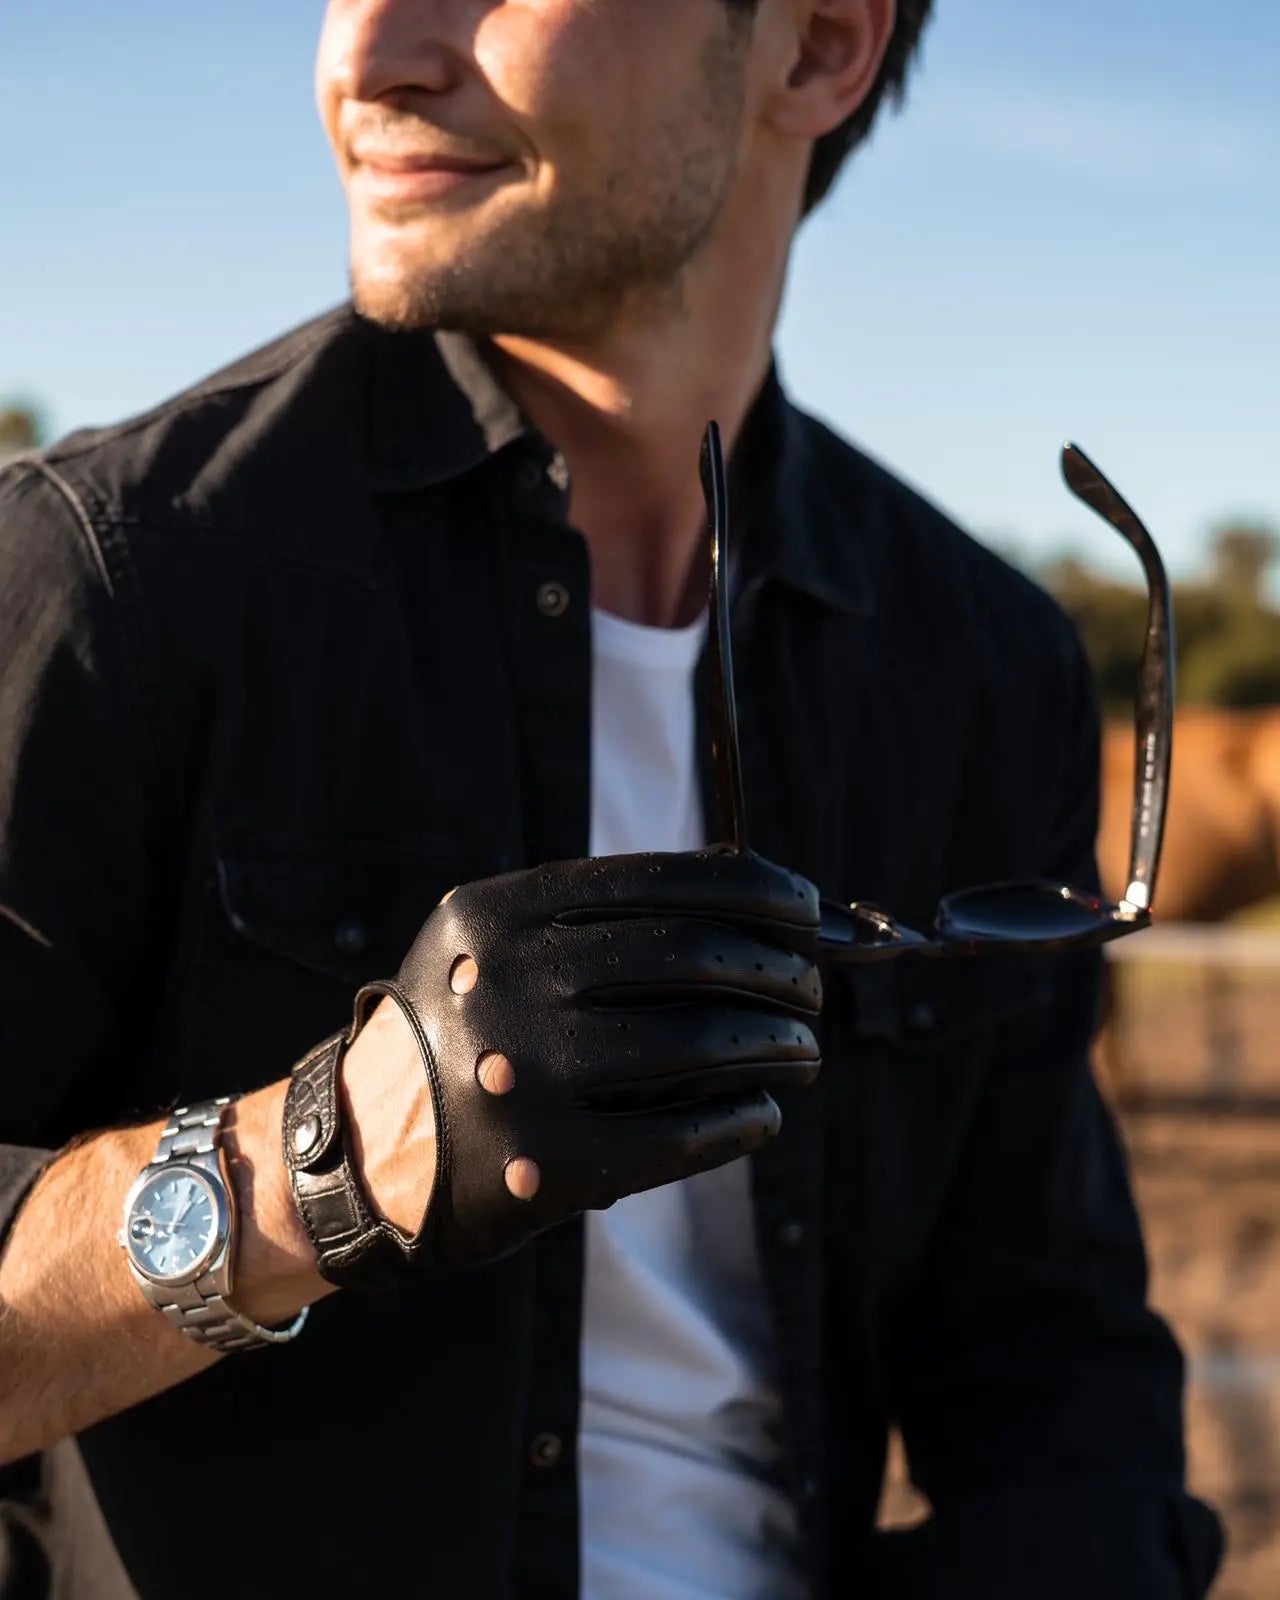 Leather gloves "Drive With Your Heart"